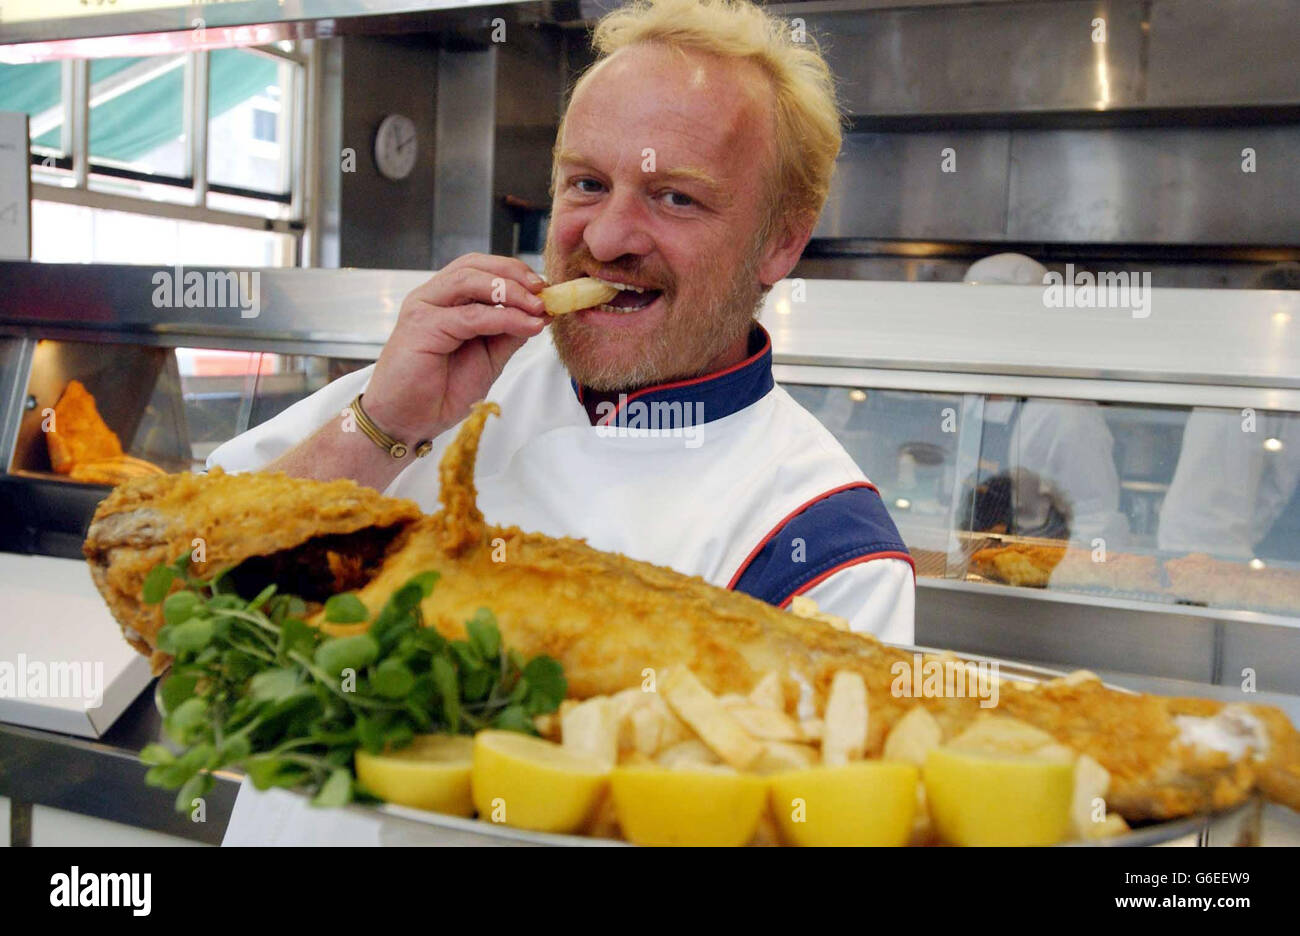 Celebrity chef Anthony Worrall Thompson samples the fish at The Seashell in Lisson Grove , north west London during the launch of the 16th annual Fish and Chip Shop of the Year Competition. * The competition organised by the Sea Fish Industry Authority (Seafish), to find the nation's best fish frier, reaches its climax early next year at a prestigious awards ceremony in London. 28/01/04: Ten fish and chip shops will find out which has won the title of the UK's top chippie. Celebrity chef Antony Worrall Thompson is due to announce the winner of the 16th annual Fish and Chip Shop of the Year Stock Photo